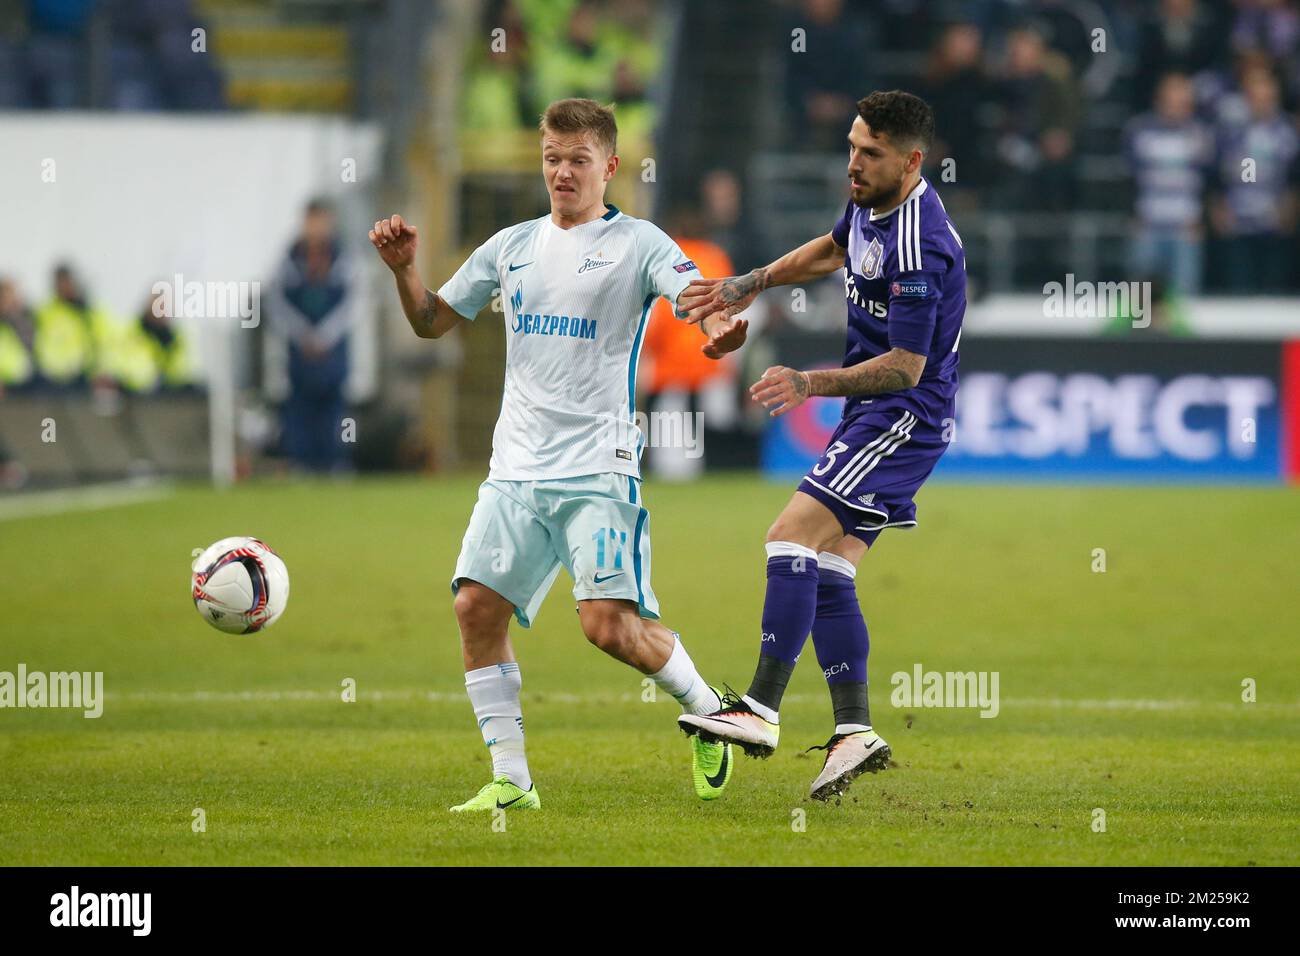 Zenit's midfielder's Oleg Shatov and Anderlecht's Nicolae-Claudiu Stanciu fight for the ball during a game between Belgian soccer team RSC Anderlecht and Russian team FC Zenit, first-leg of the 1/16 finals of the Europa League competition, Thursday 16 February 2017, in Brussels. BELGA PHOTO BRUNO FAHY Stock Photo